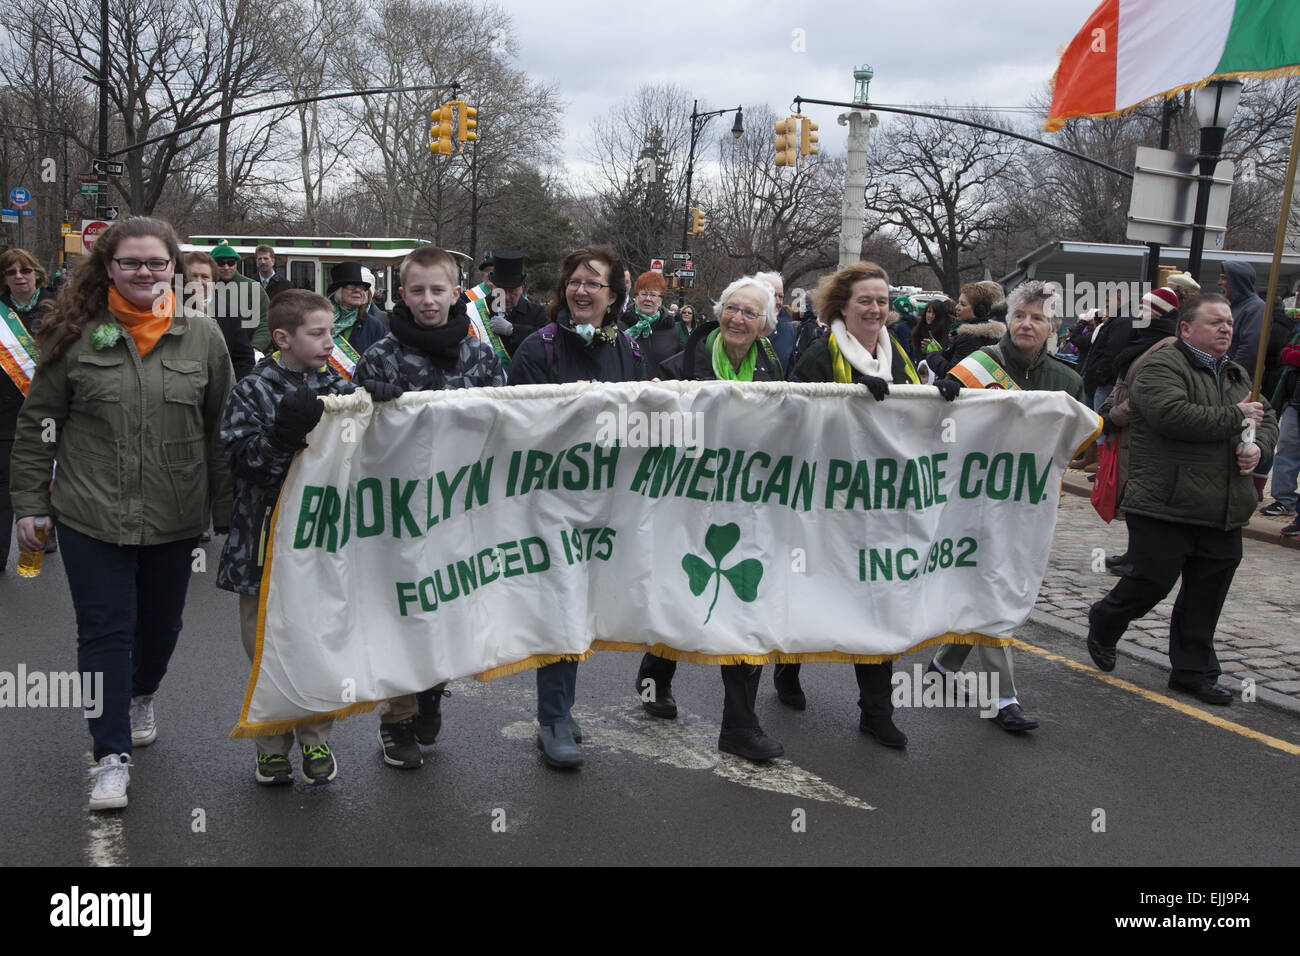 Women and boys carry a banner leading the Brooklyn Irish American Parade in Park Slope, Brooklyn, NY. Stock Photo